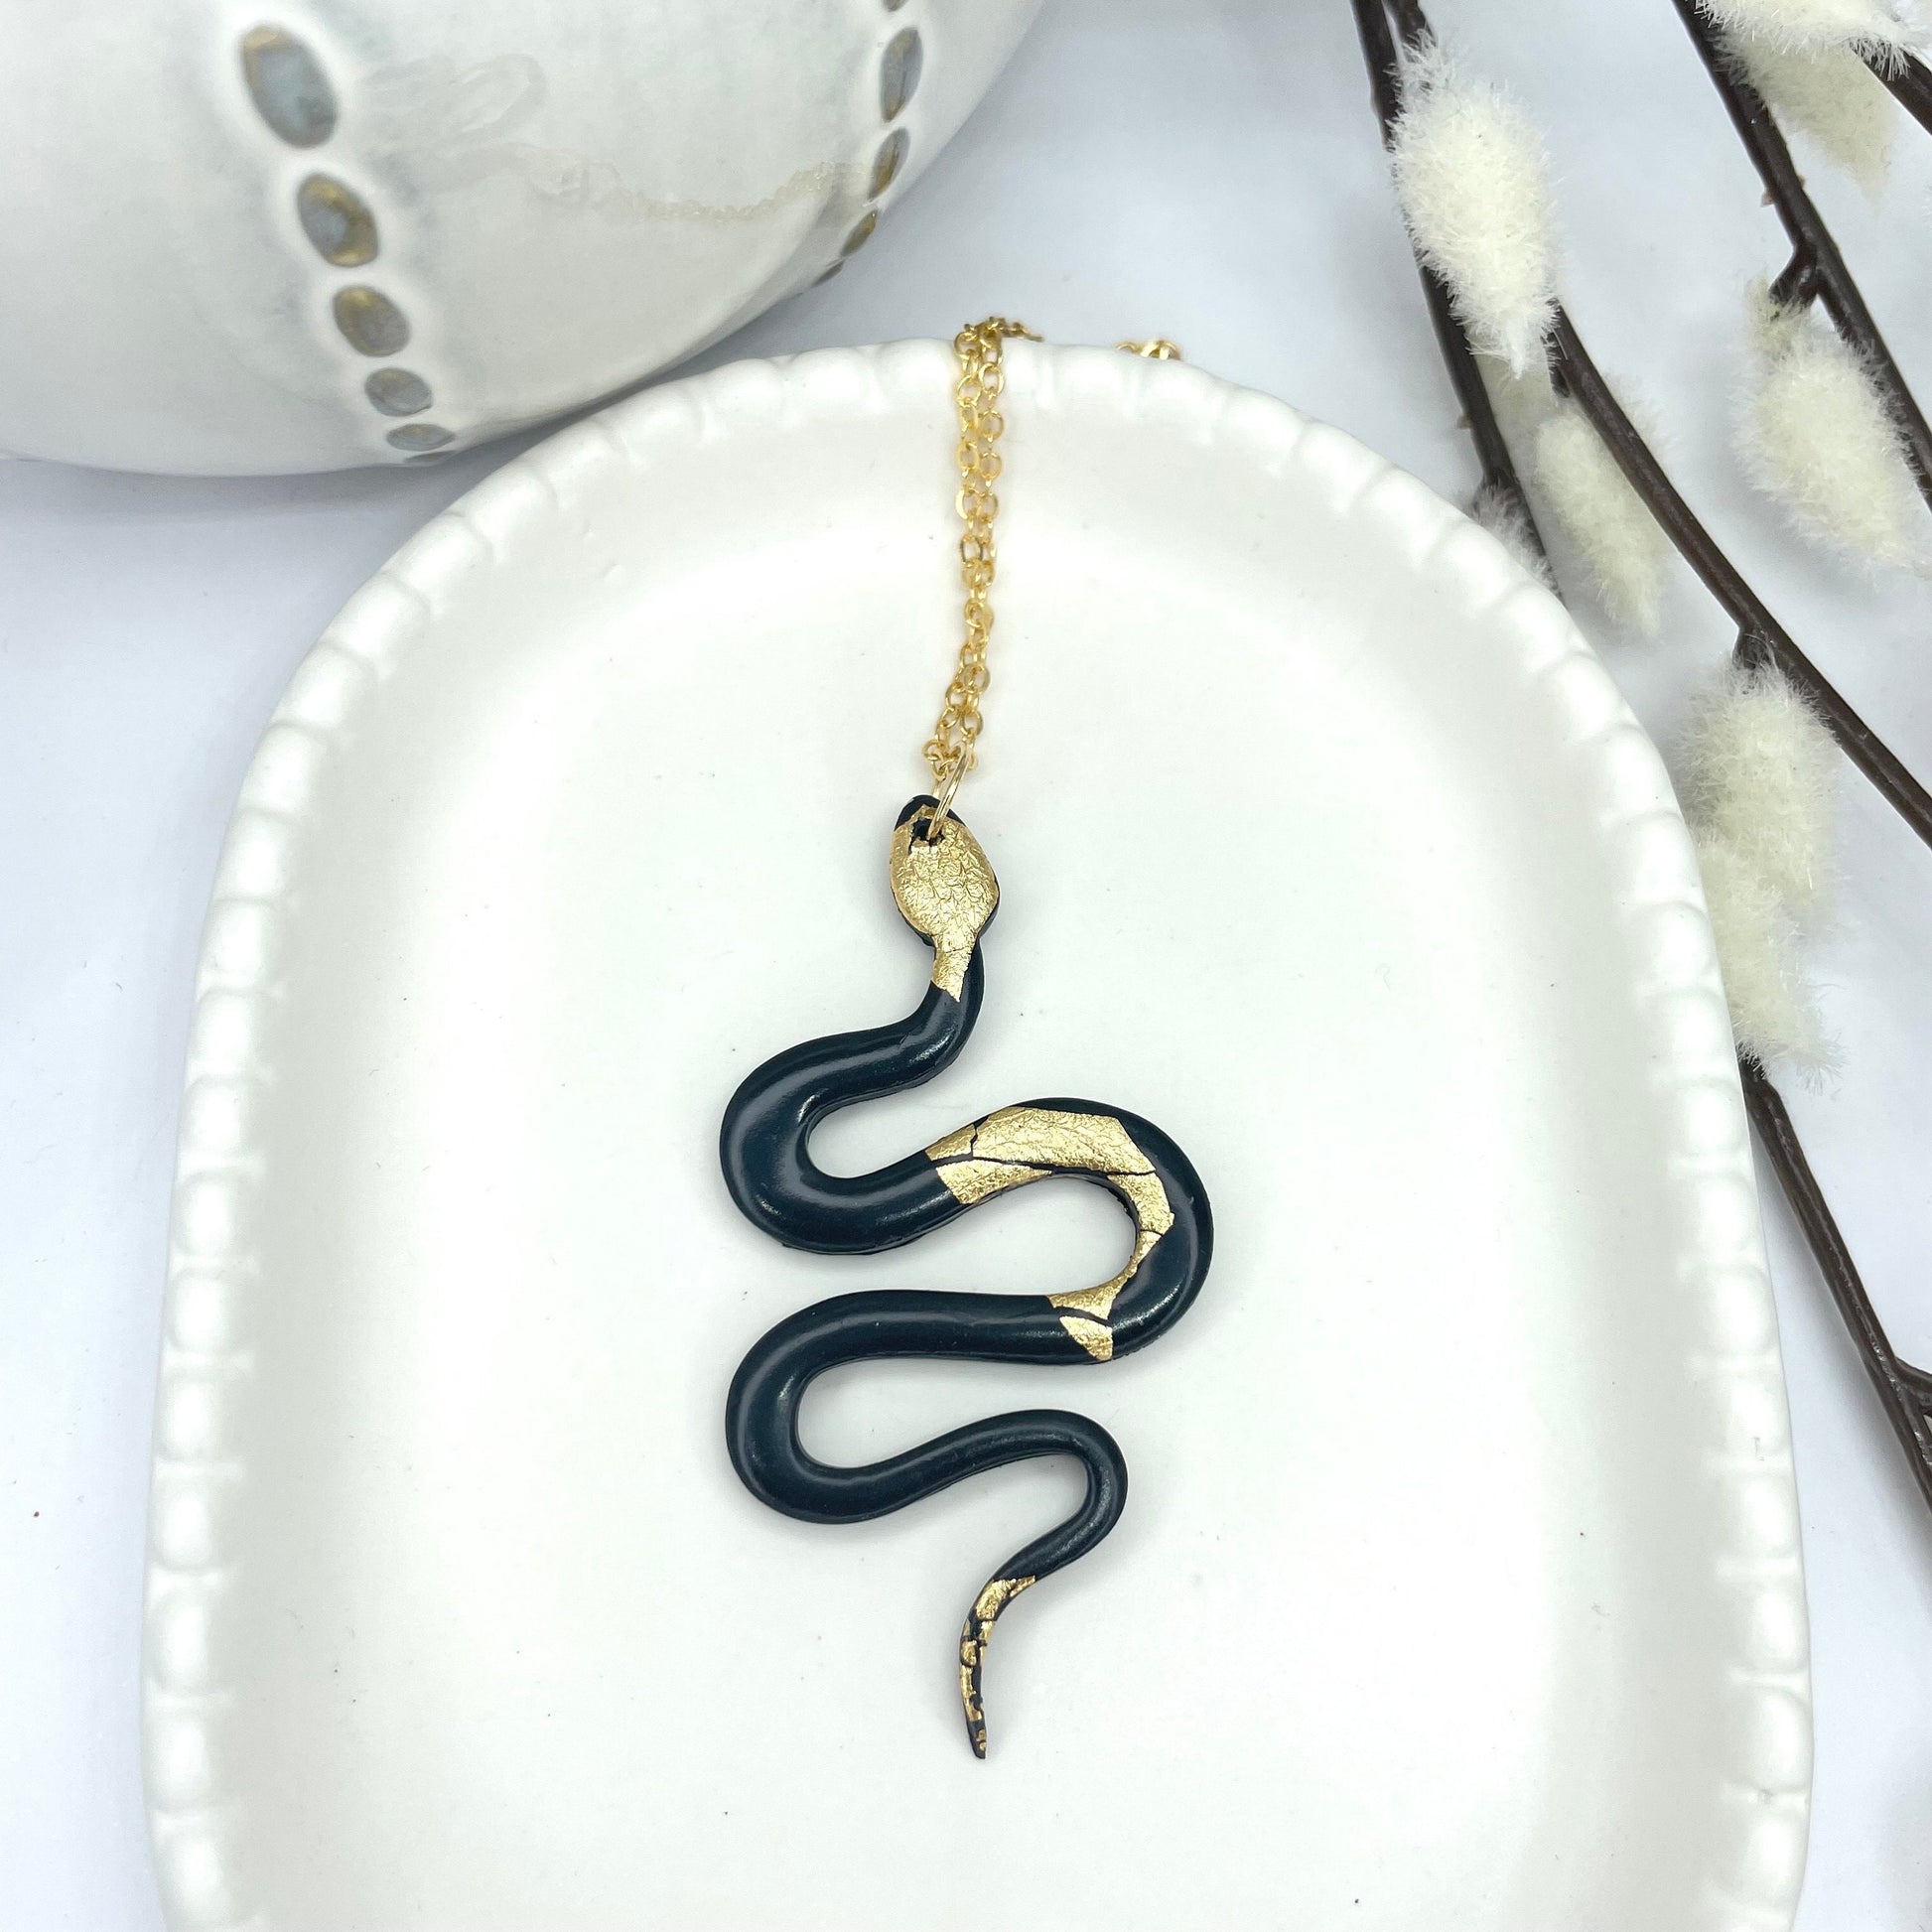 Black and gold snake necklace, polymer clay snake on gold plated chain, gothic jewellery, snake jewellery, Halloween jewellery,